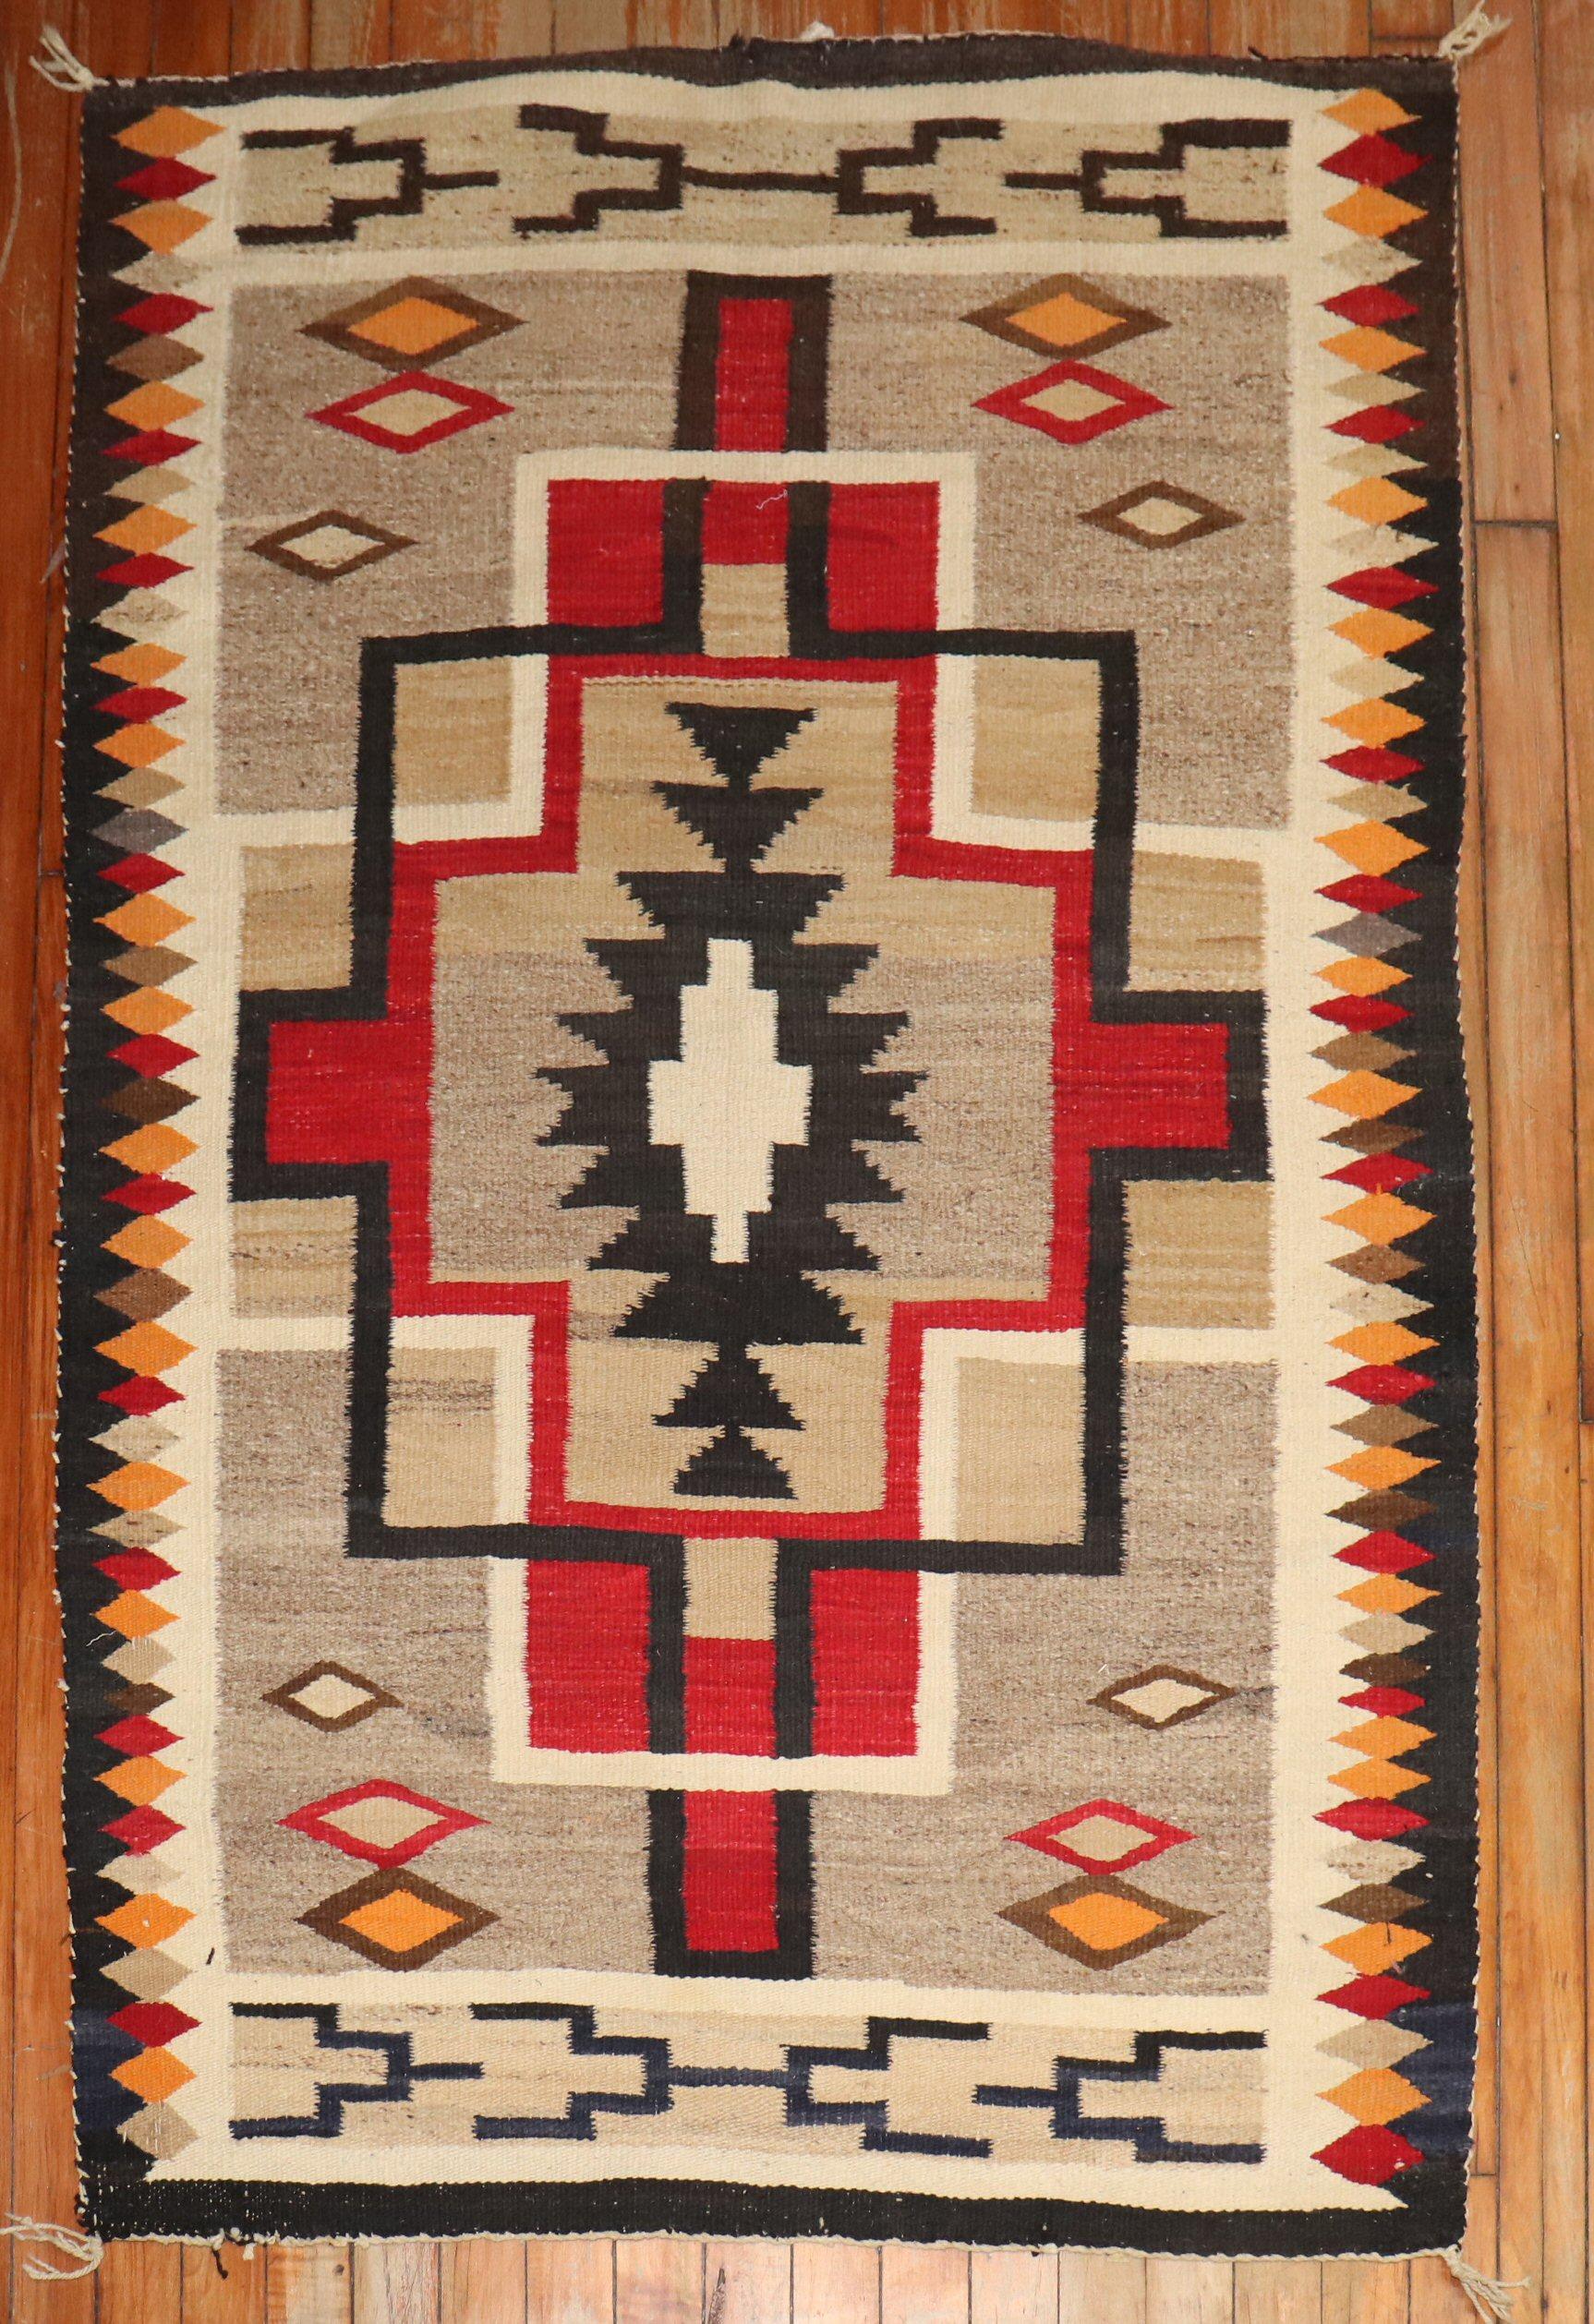 A highly decorative 20th-century American Navajo rug with a geometric tribal design  

Measures: 3'2'' x 4'10''.